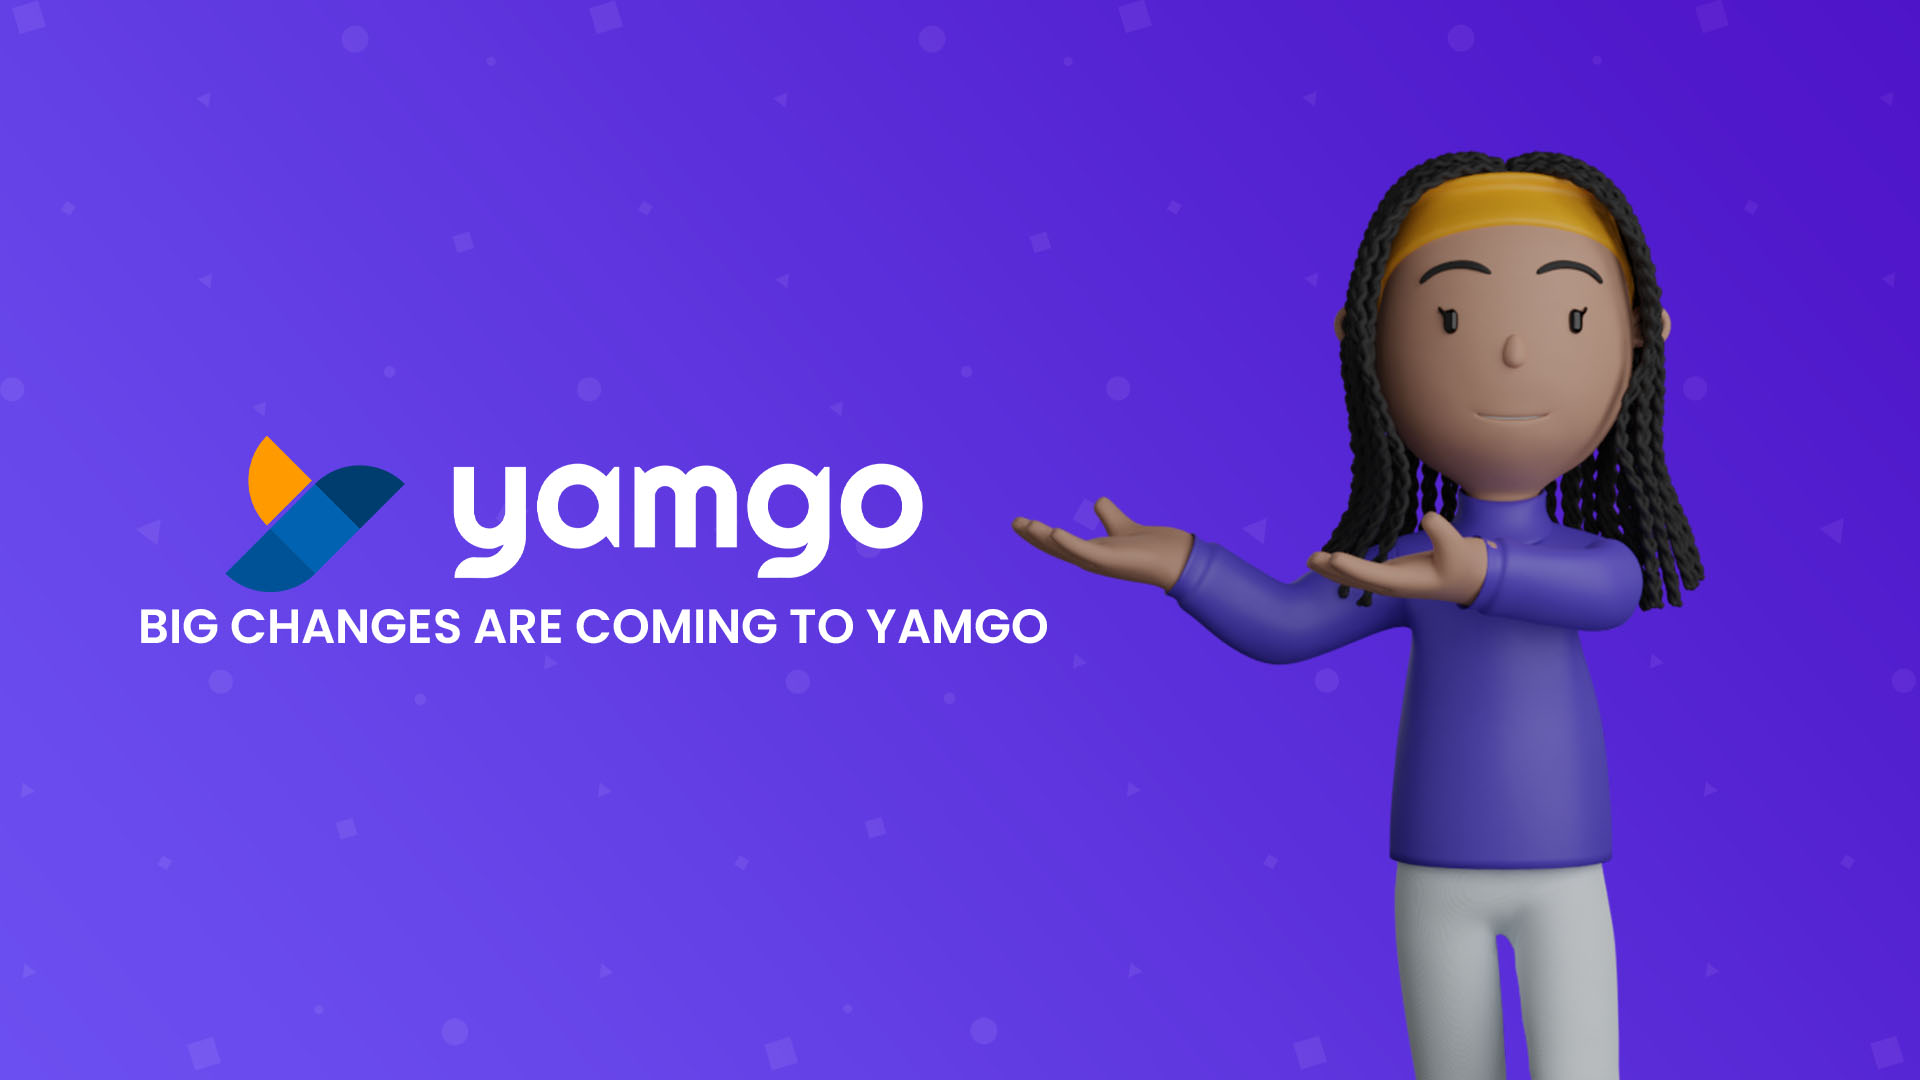 Big Changes are coming as Yamgo prepares to move out of beta